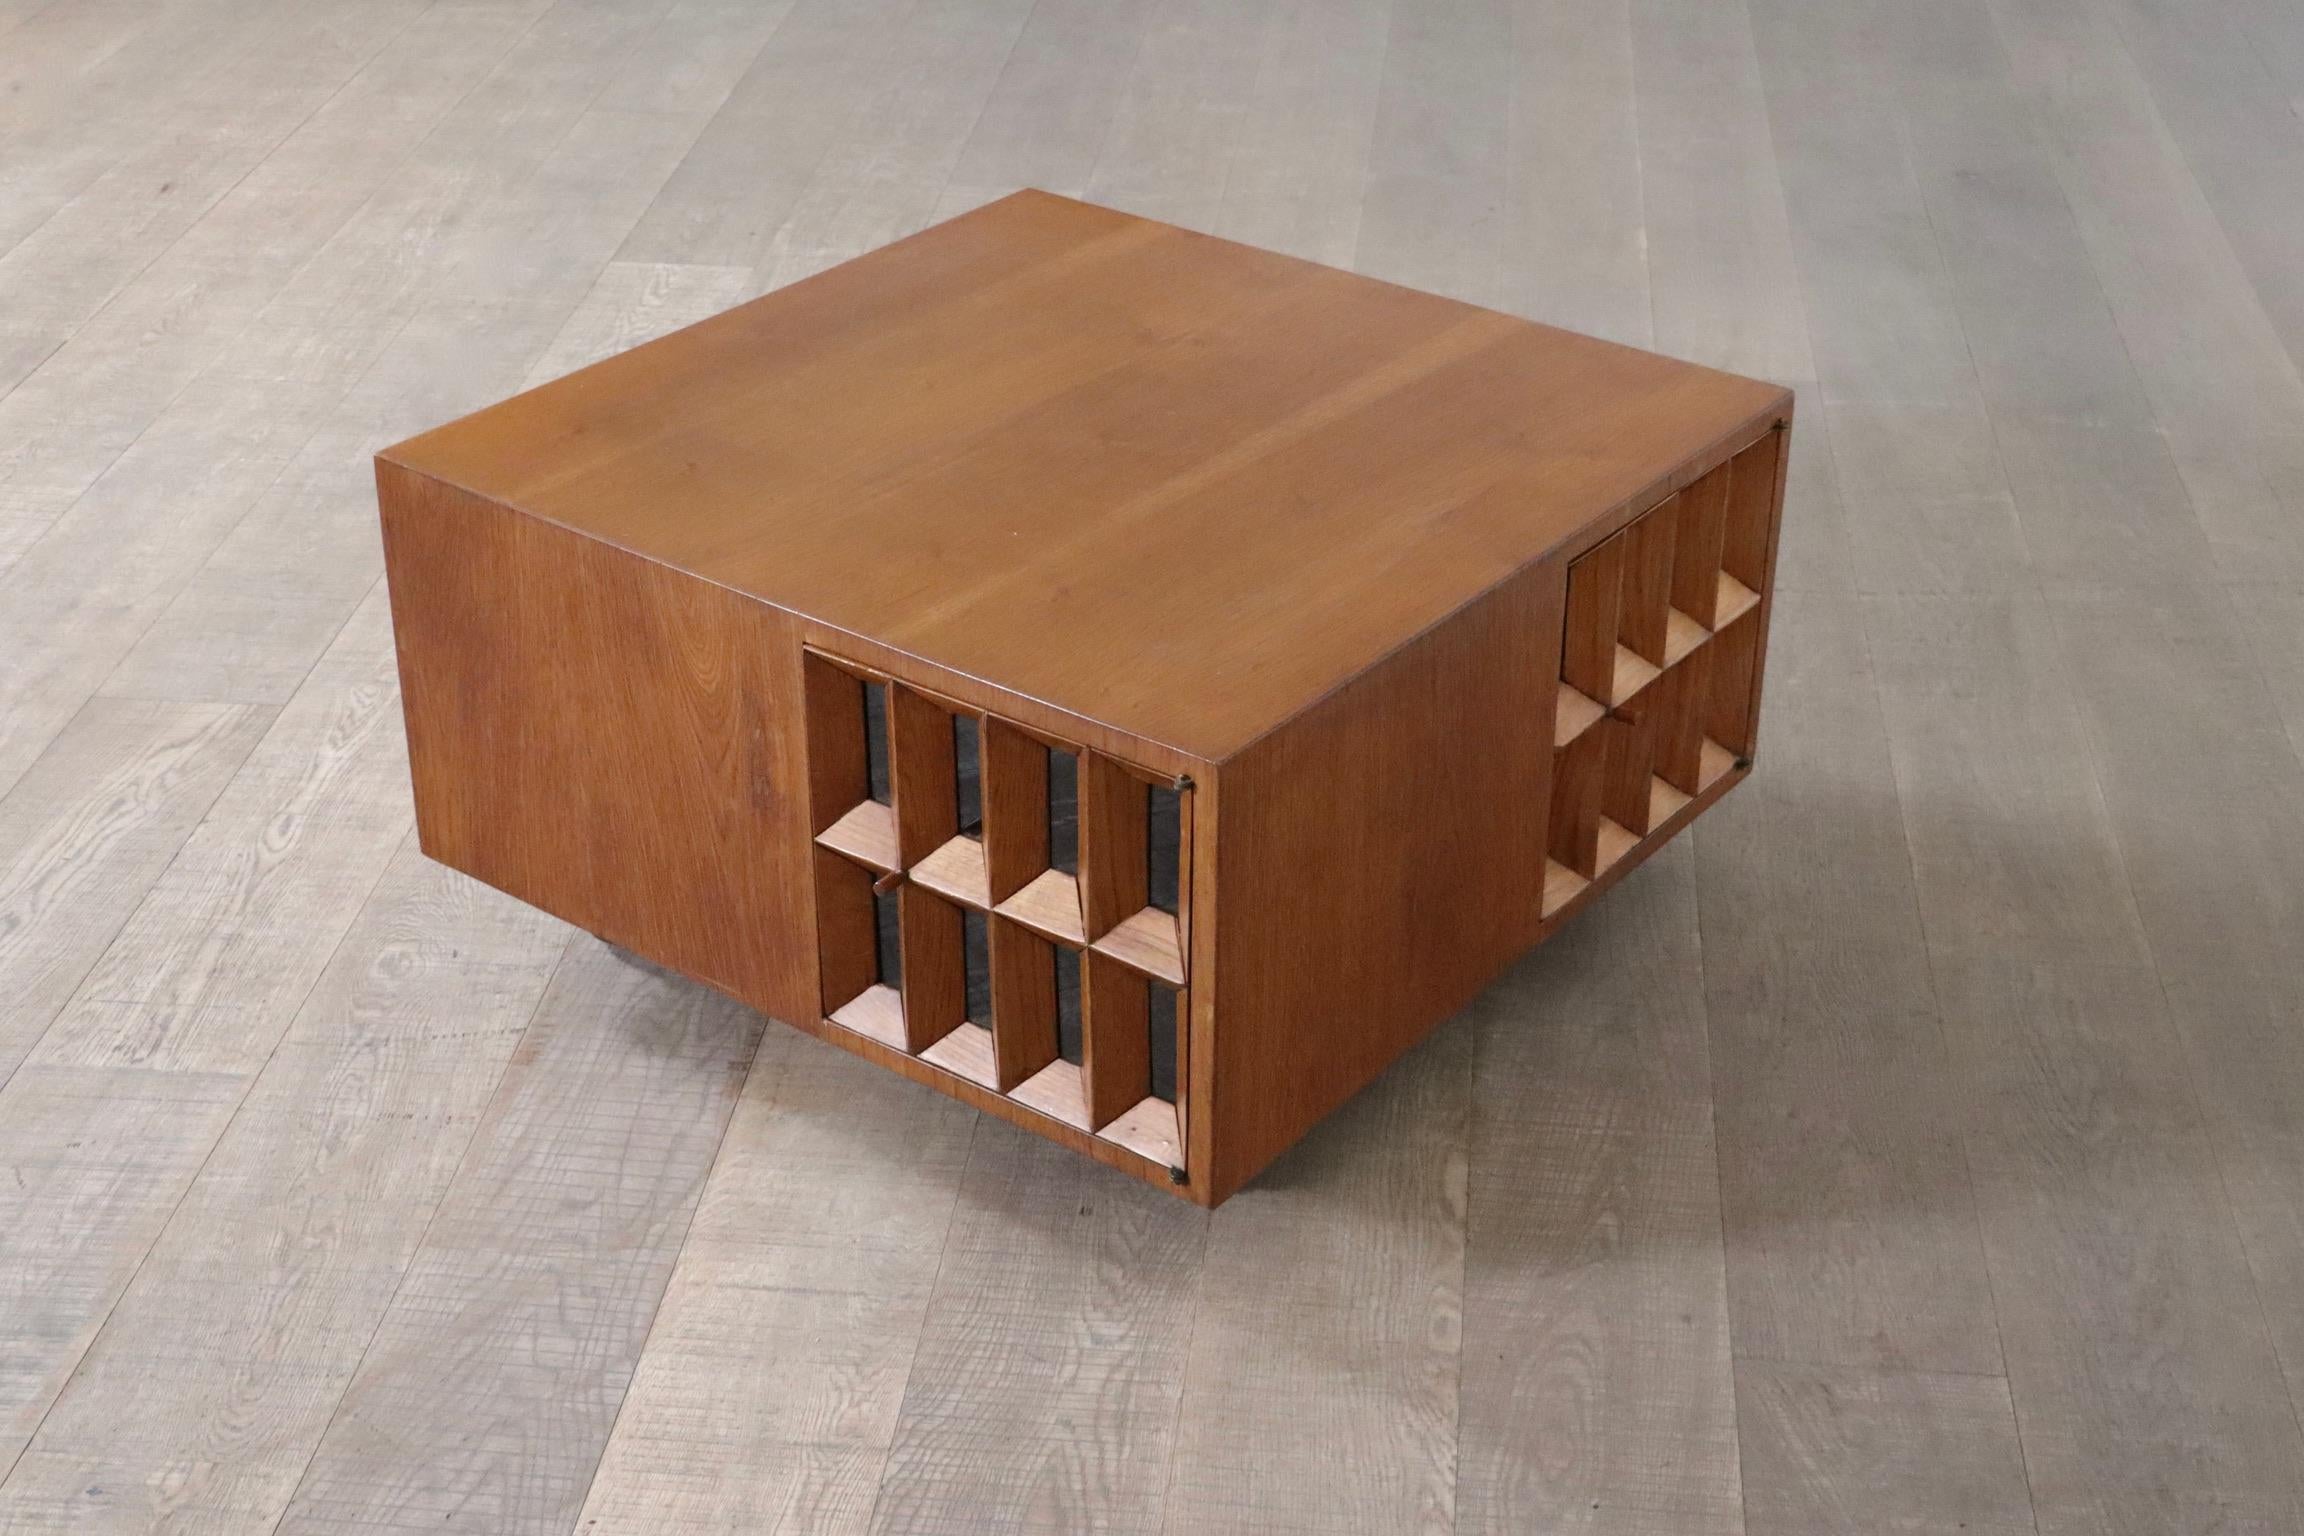 Late 20th Century Giuseppe Rivadossi Coffee Table In Oak With Glass Framed Doors, Italy 1975 For Sale